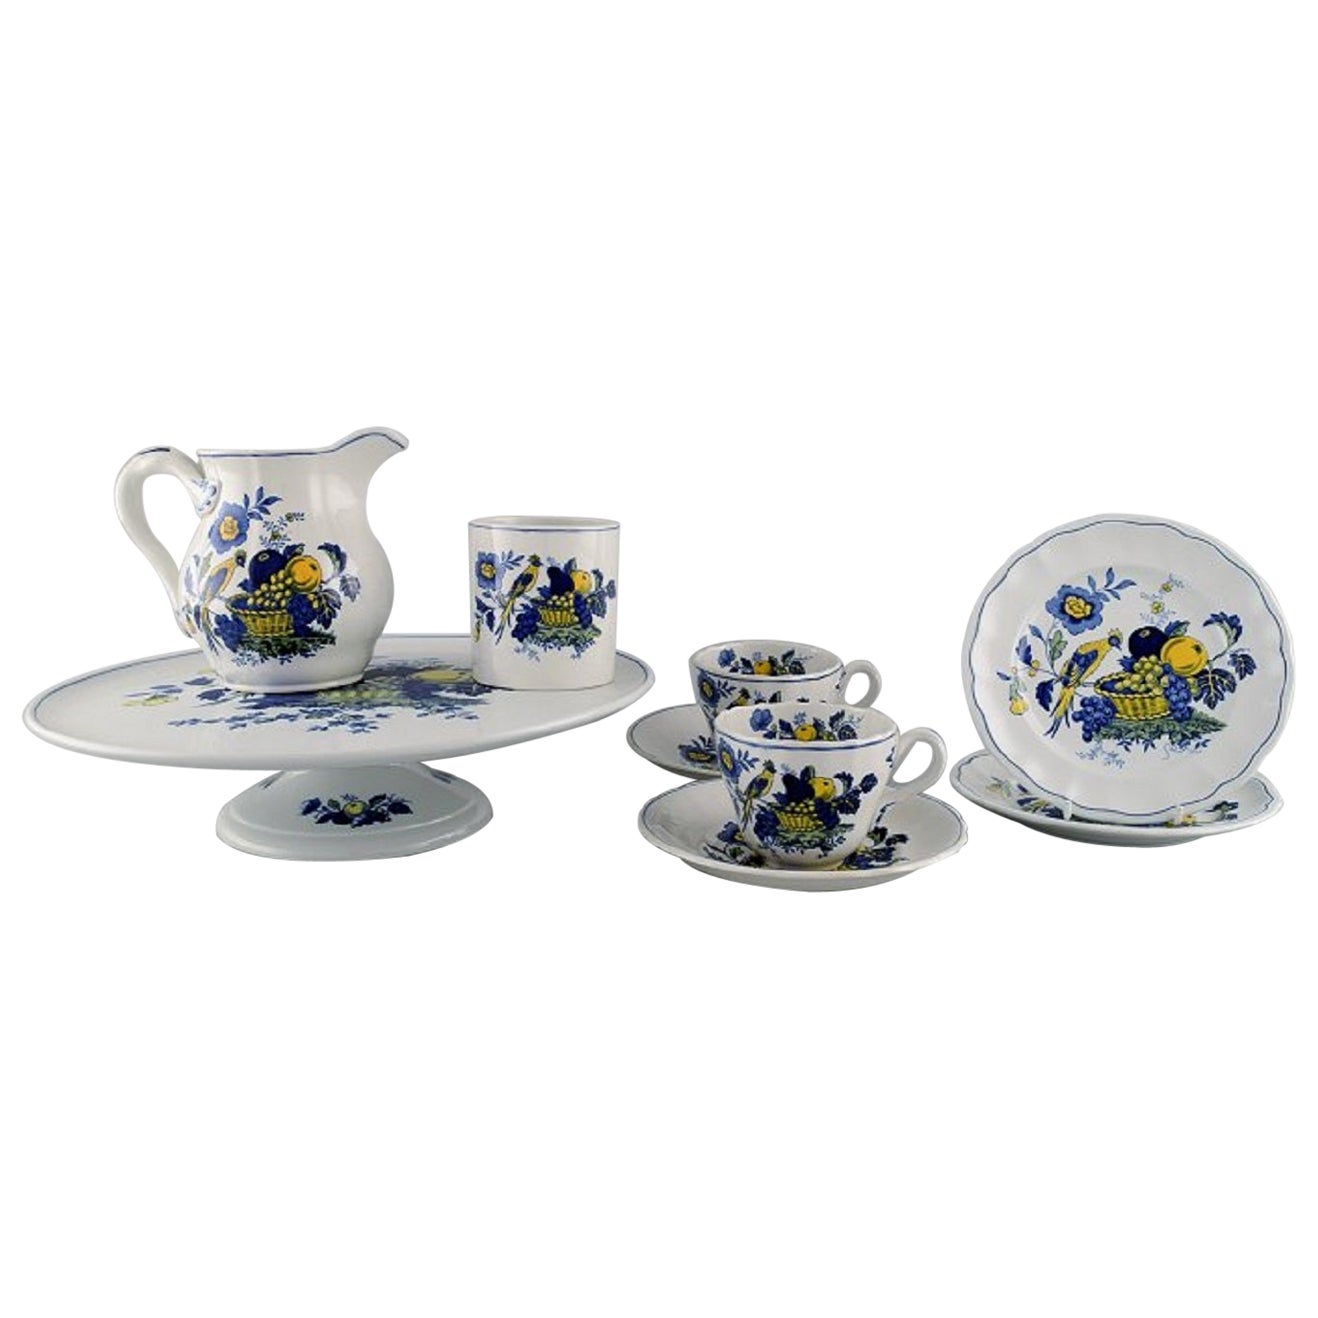 Spode, England, Blue Bird Service in Hand-Painted Porcelain, 1930s/40s